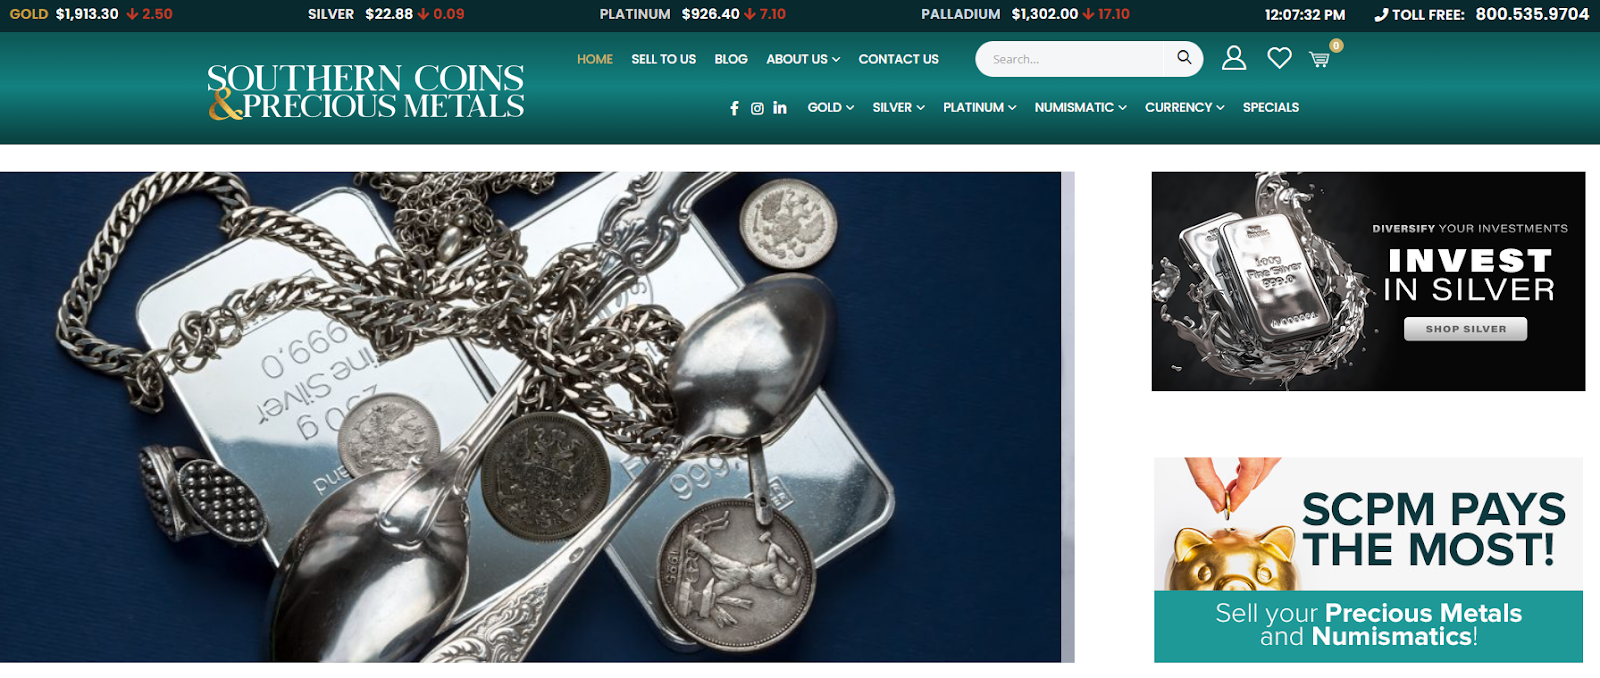 Southern coins and precious metals website